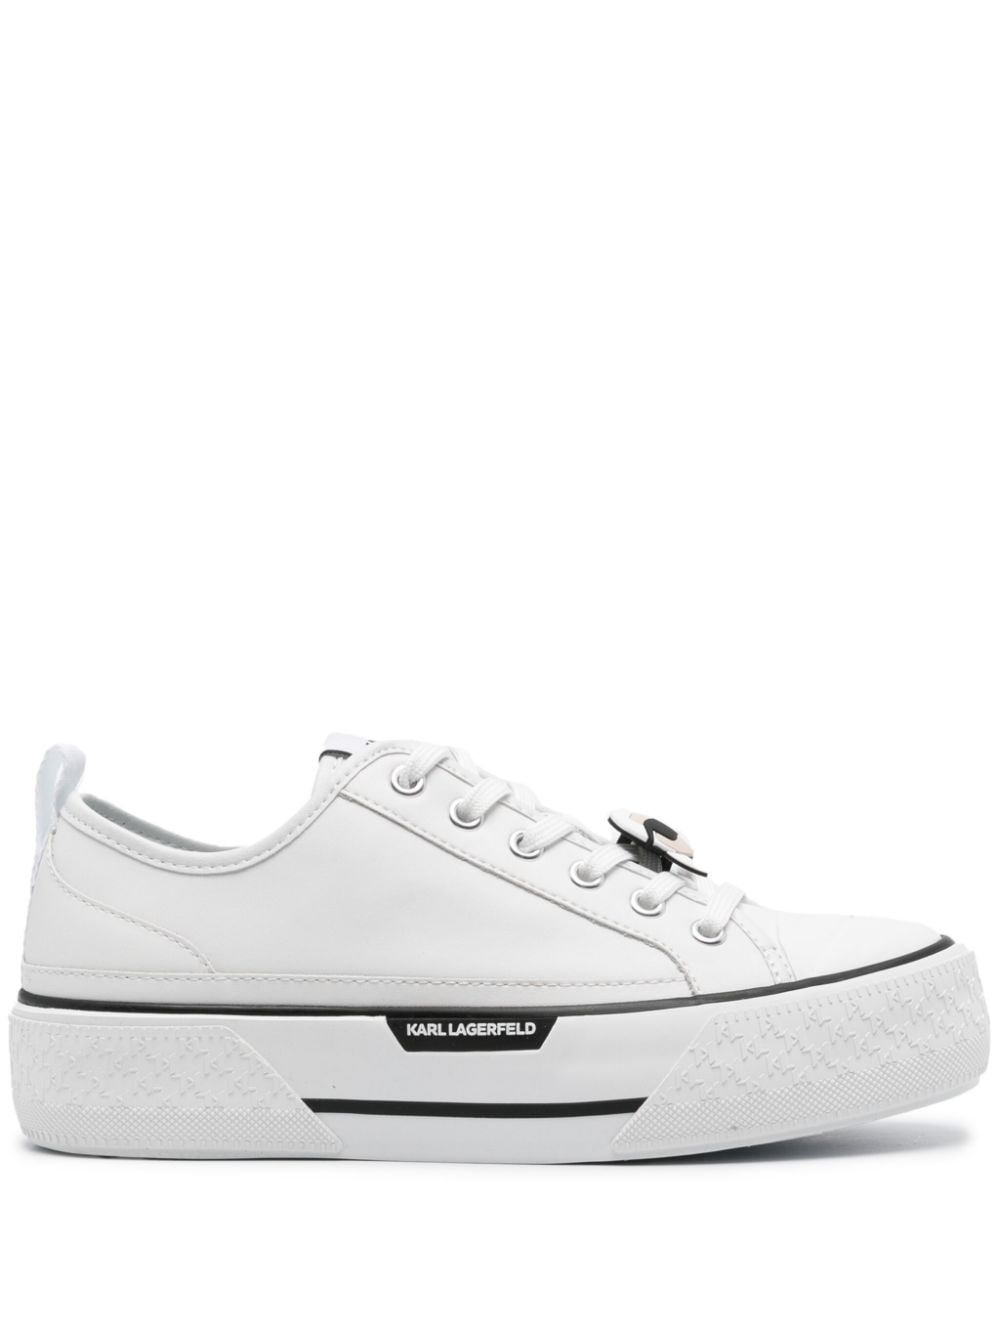 Karl Lagerfeld Kampus Max Iii Leather Trainers In White